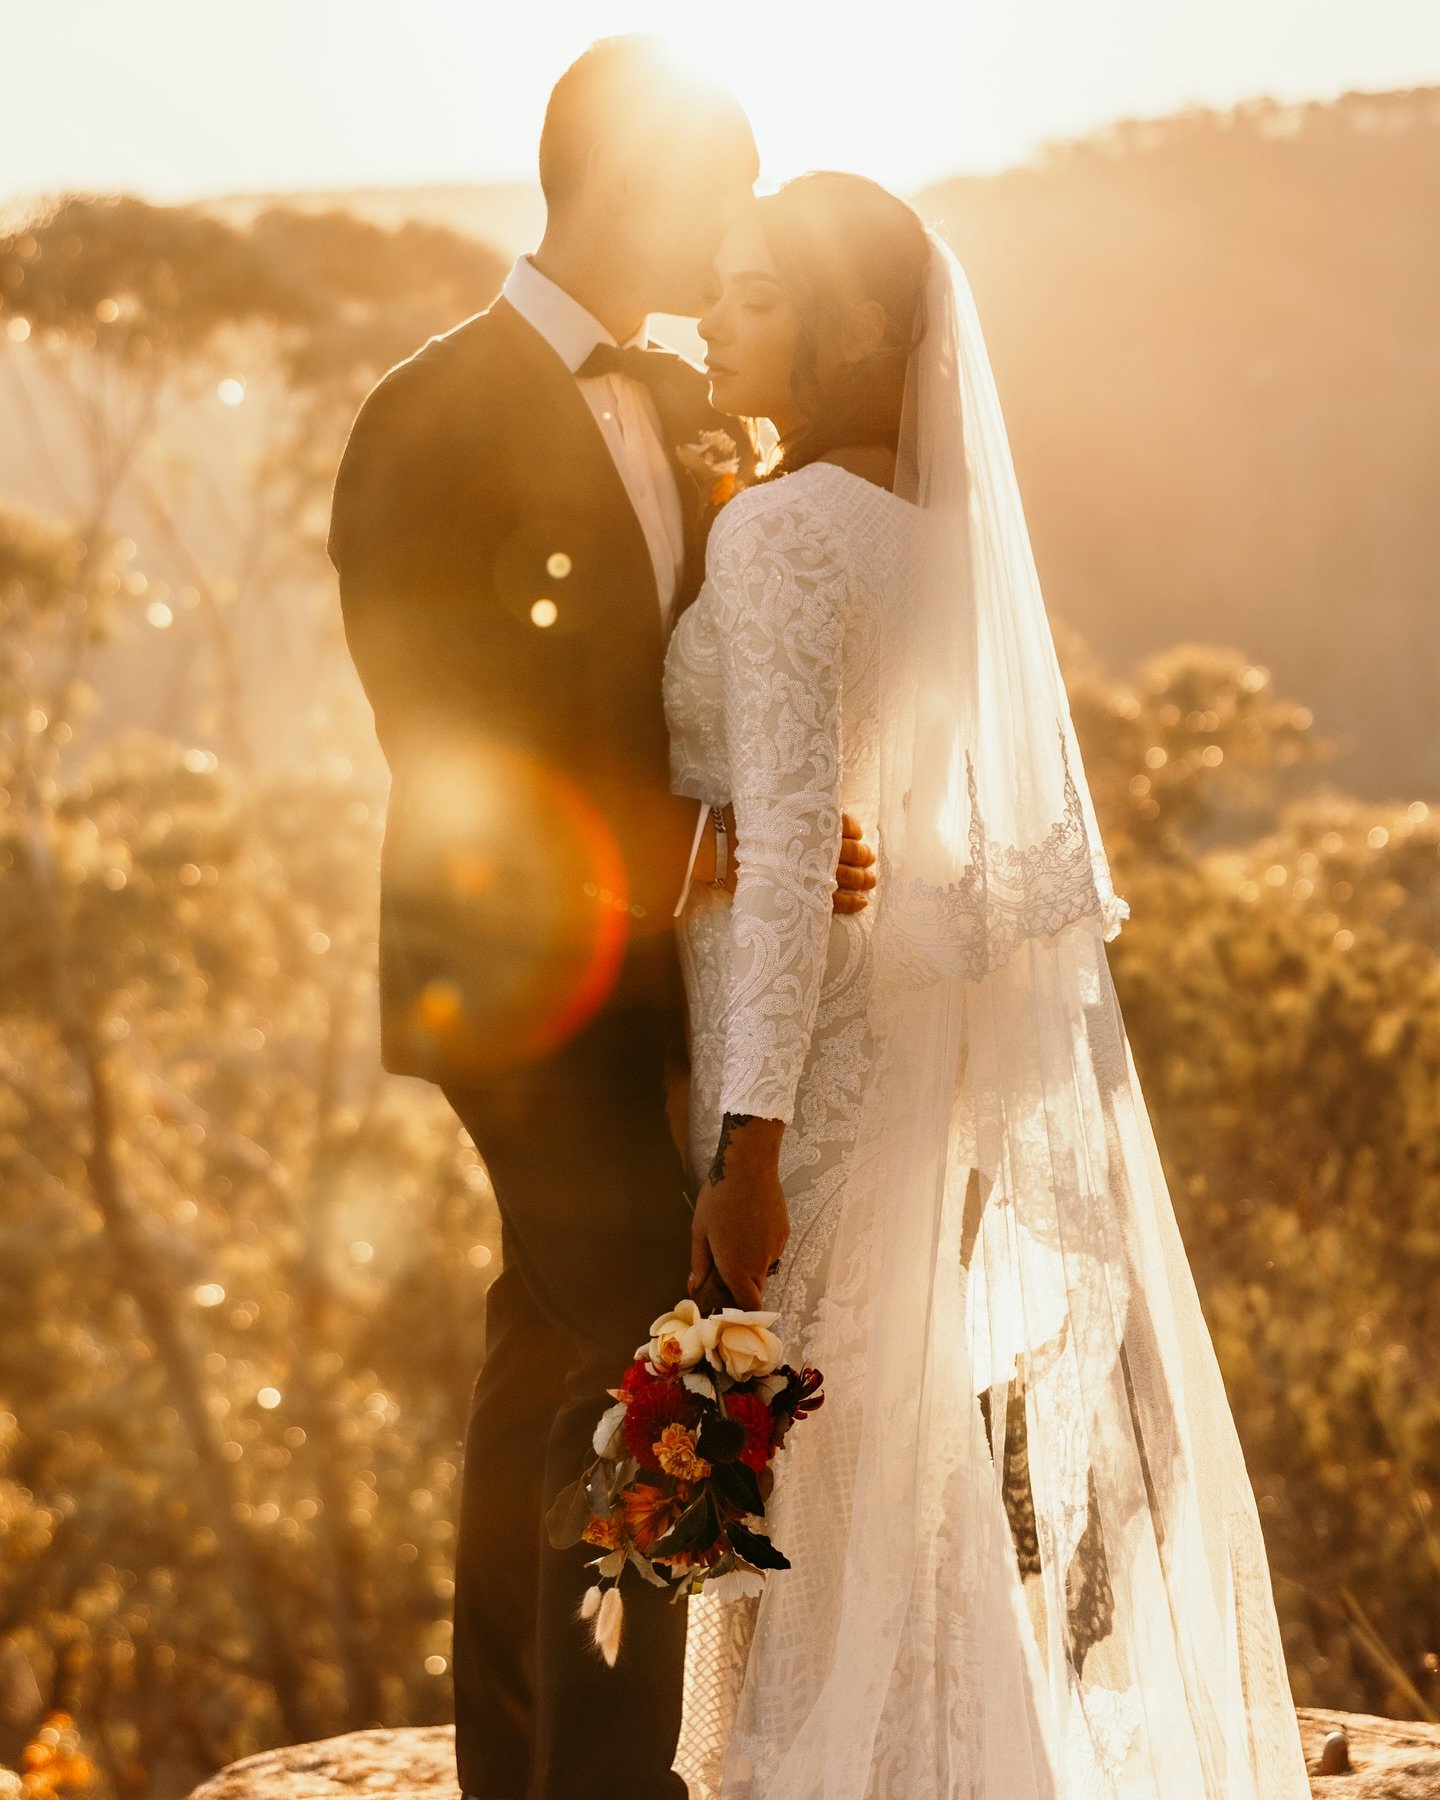 ✨ ON THE BLOG: Why Every Couple Needs &lsquo;Golden Hour&rsquo; Photos on Their Wedding Day ✨ 
Golden hour at sunset bathes your wedding in warm, soft light, adding a magical glow to your photos. 🌅 Take a moment to pause and soak in your day with th